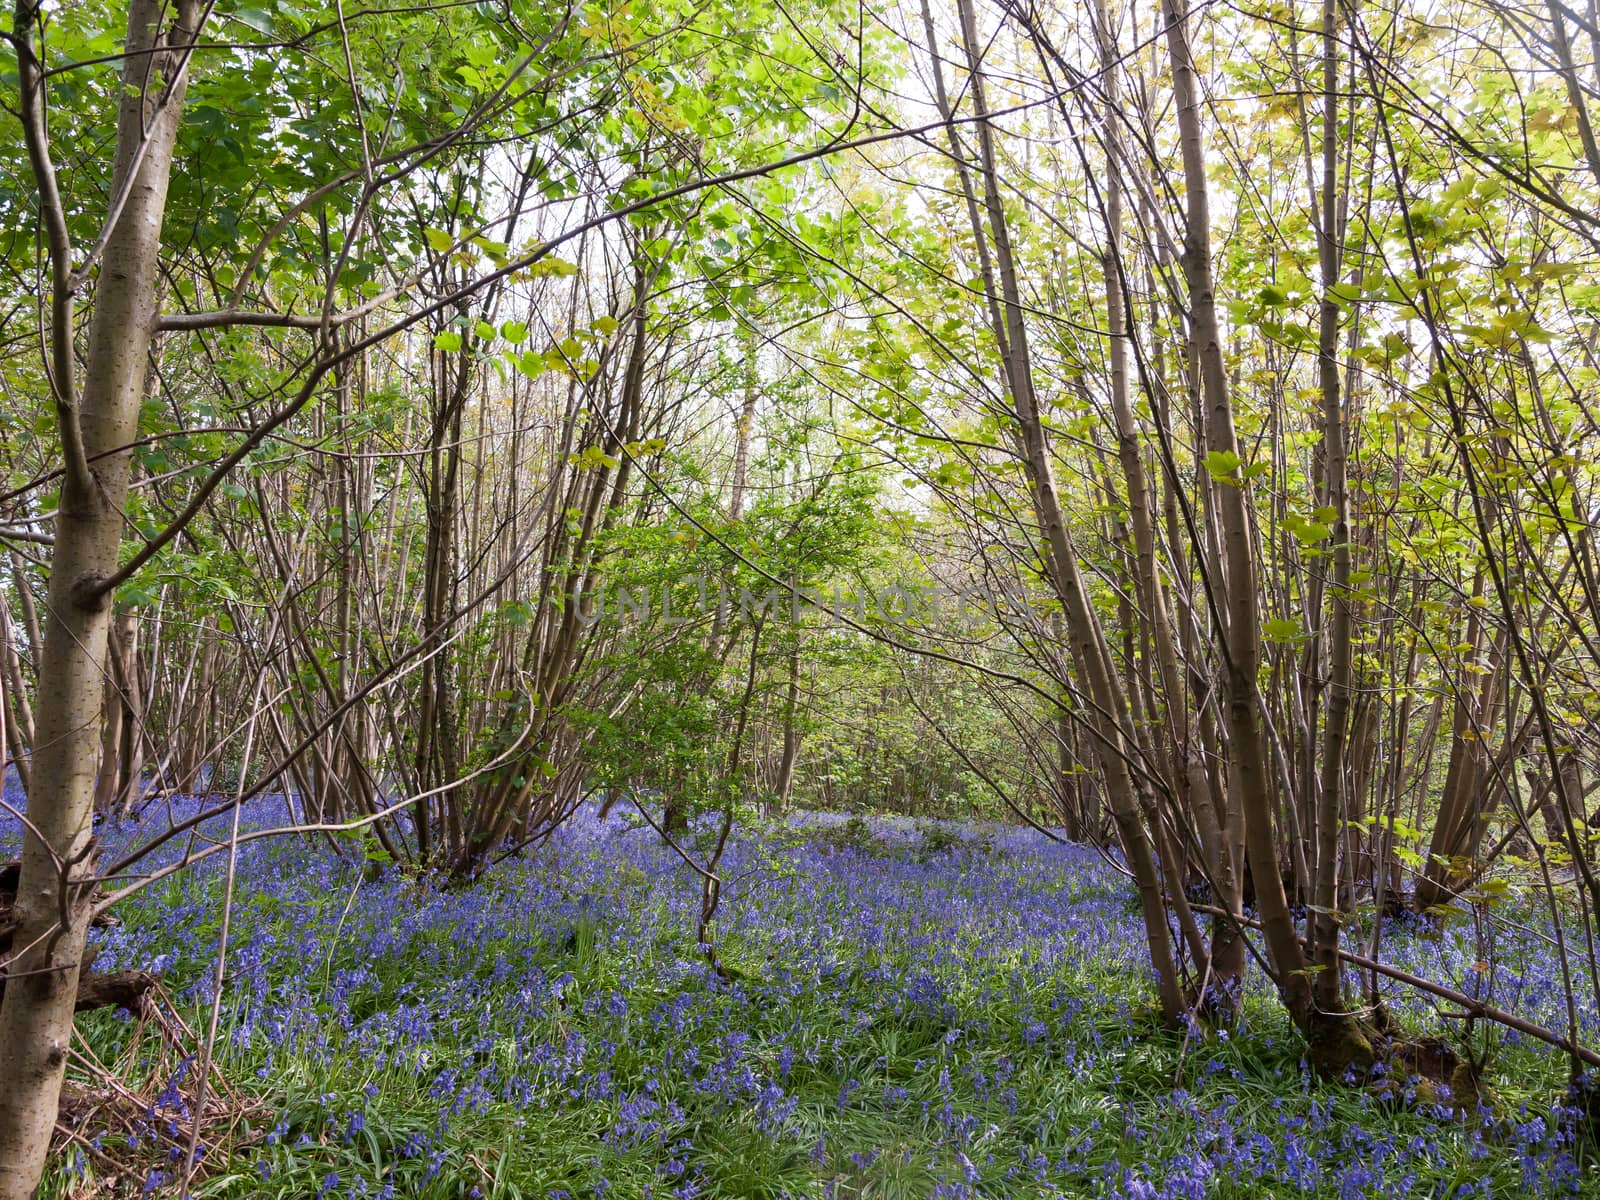 inside forest woodland spring with blue bells flowers across flo by callumrc